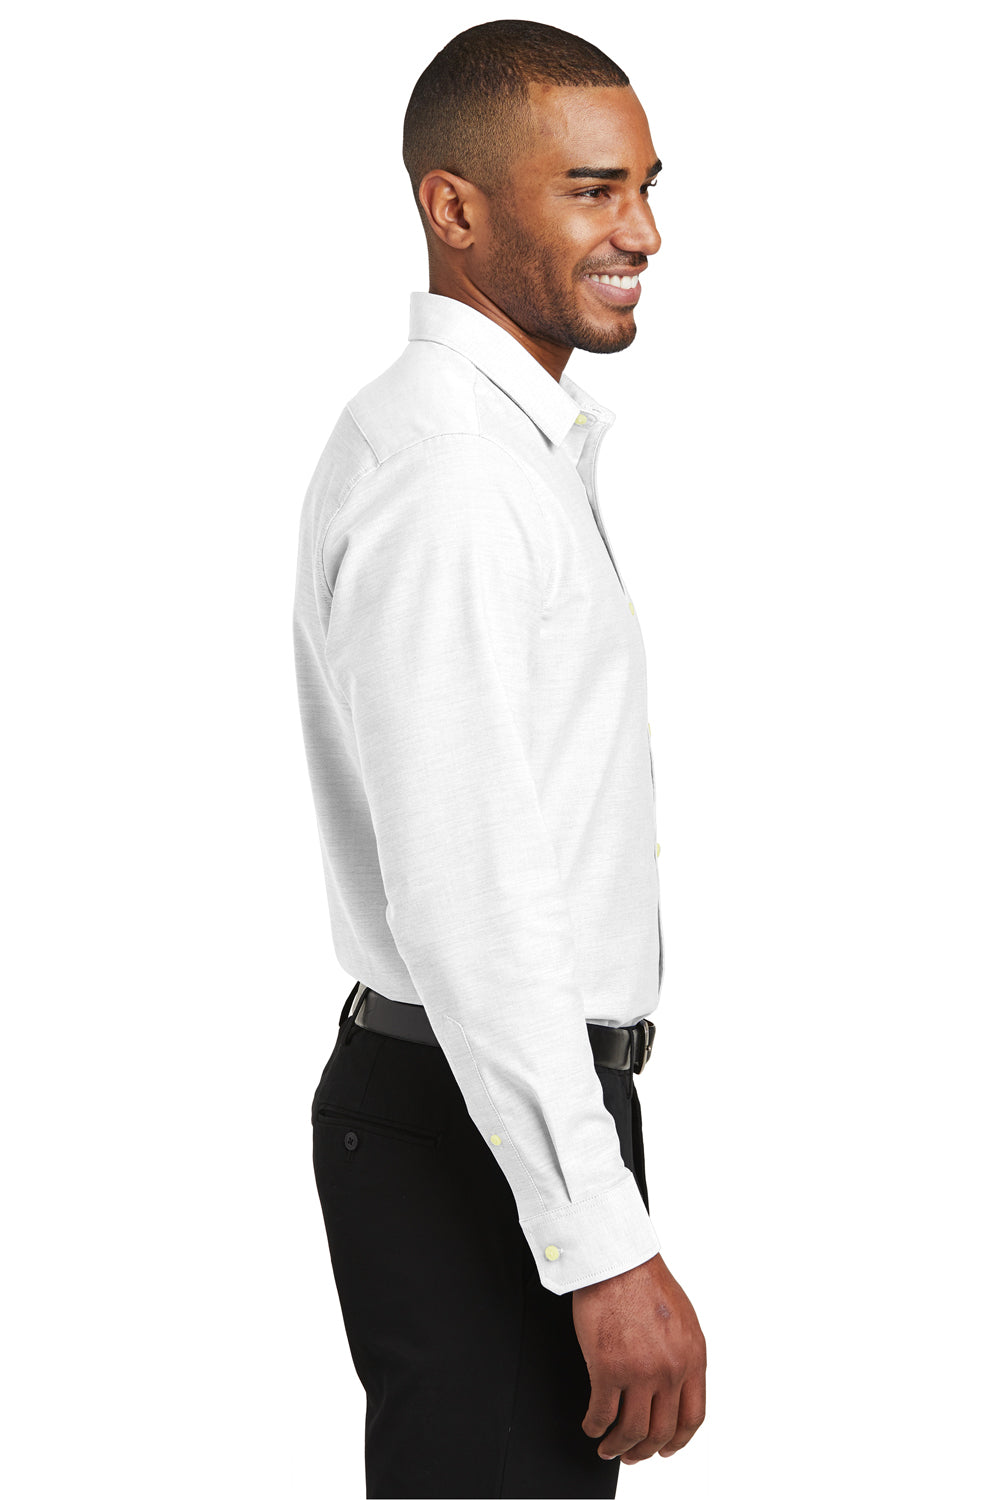 Port Authority S661 Mens SuperPro Oxford Wrinkle Resistant Long Sleeve Button Down Shirt White Side